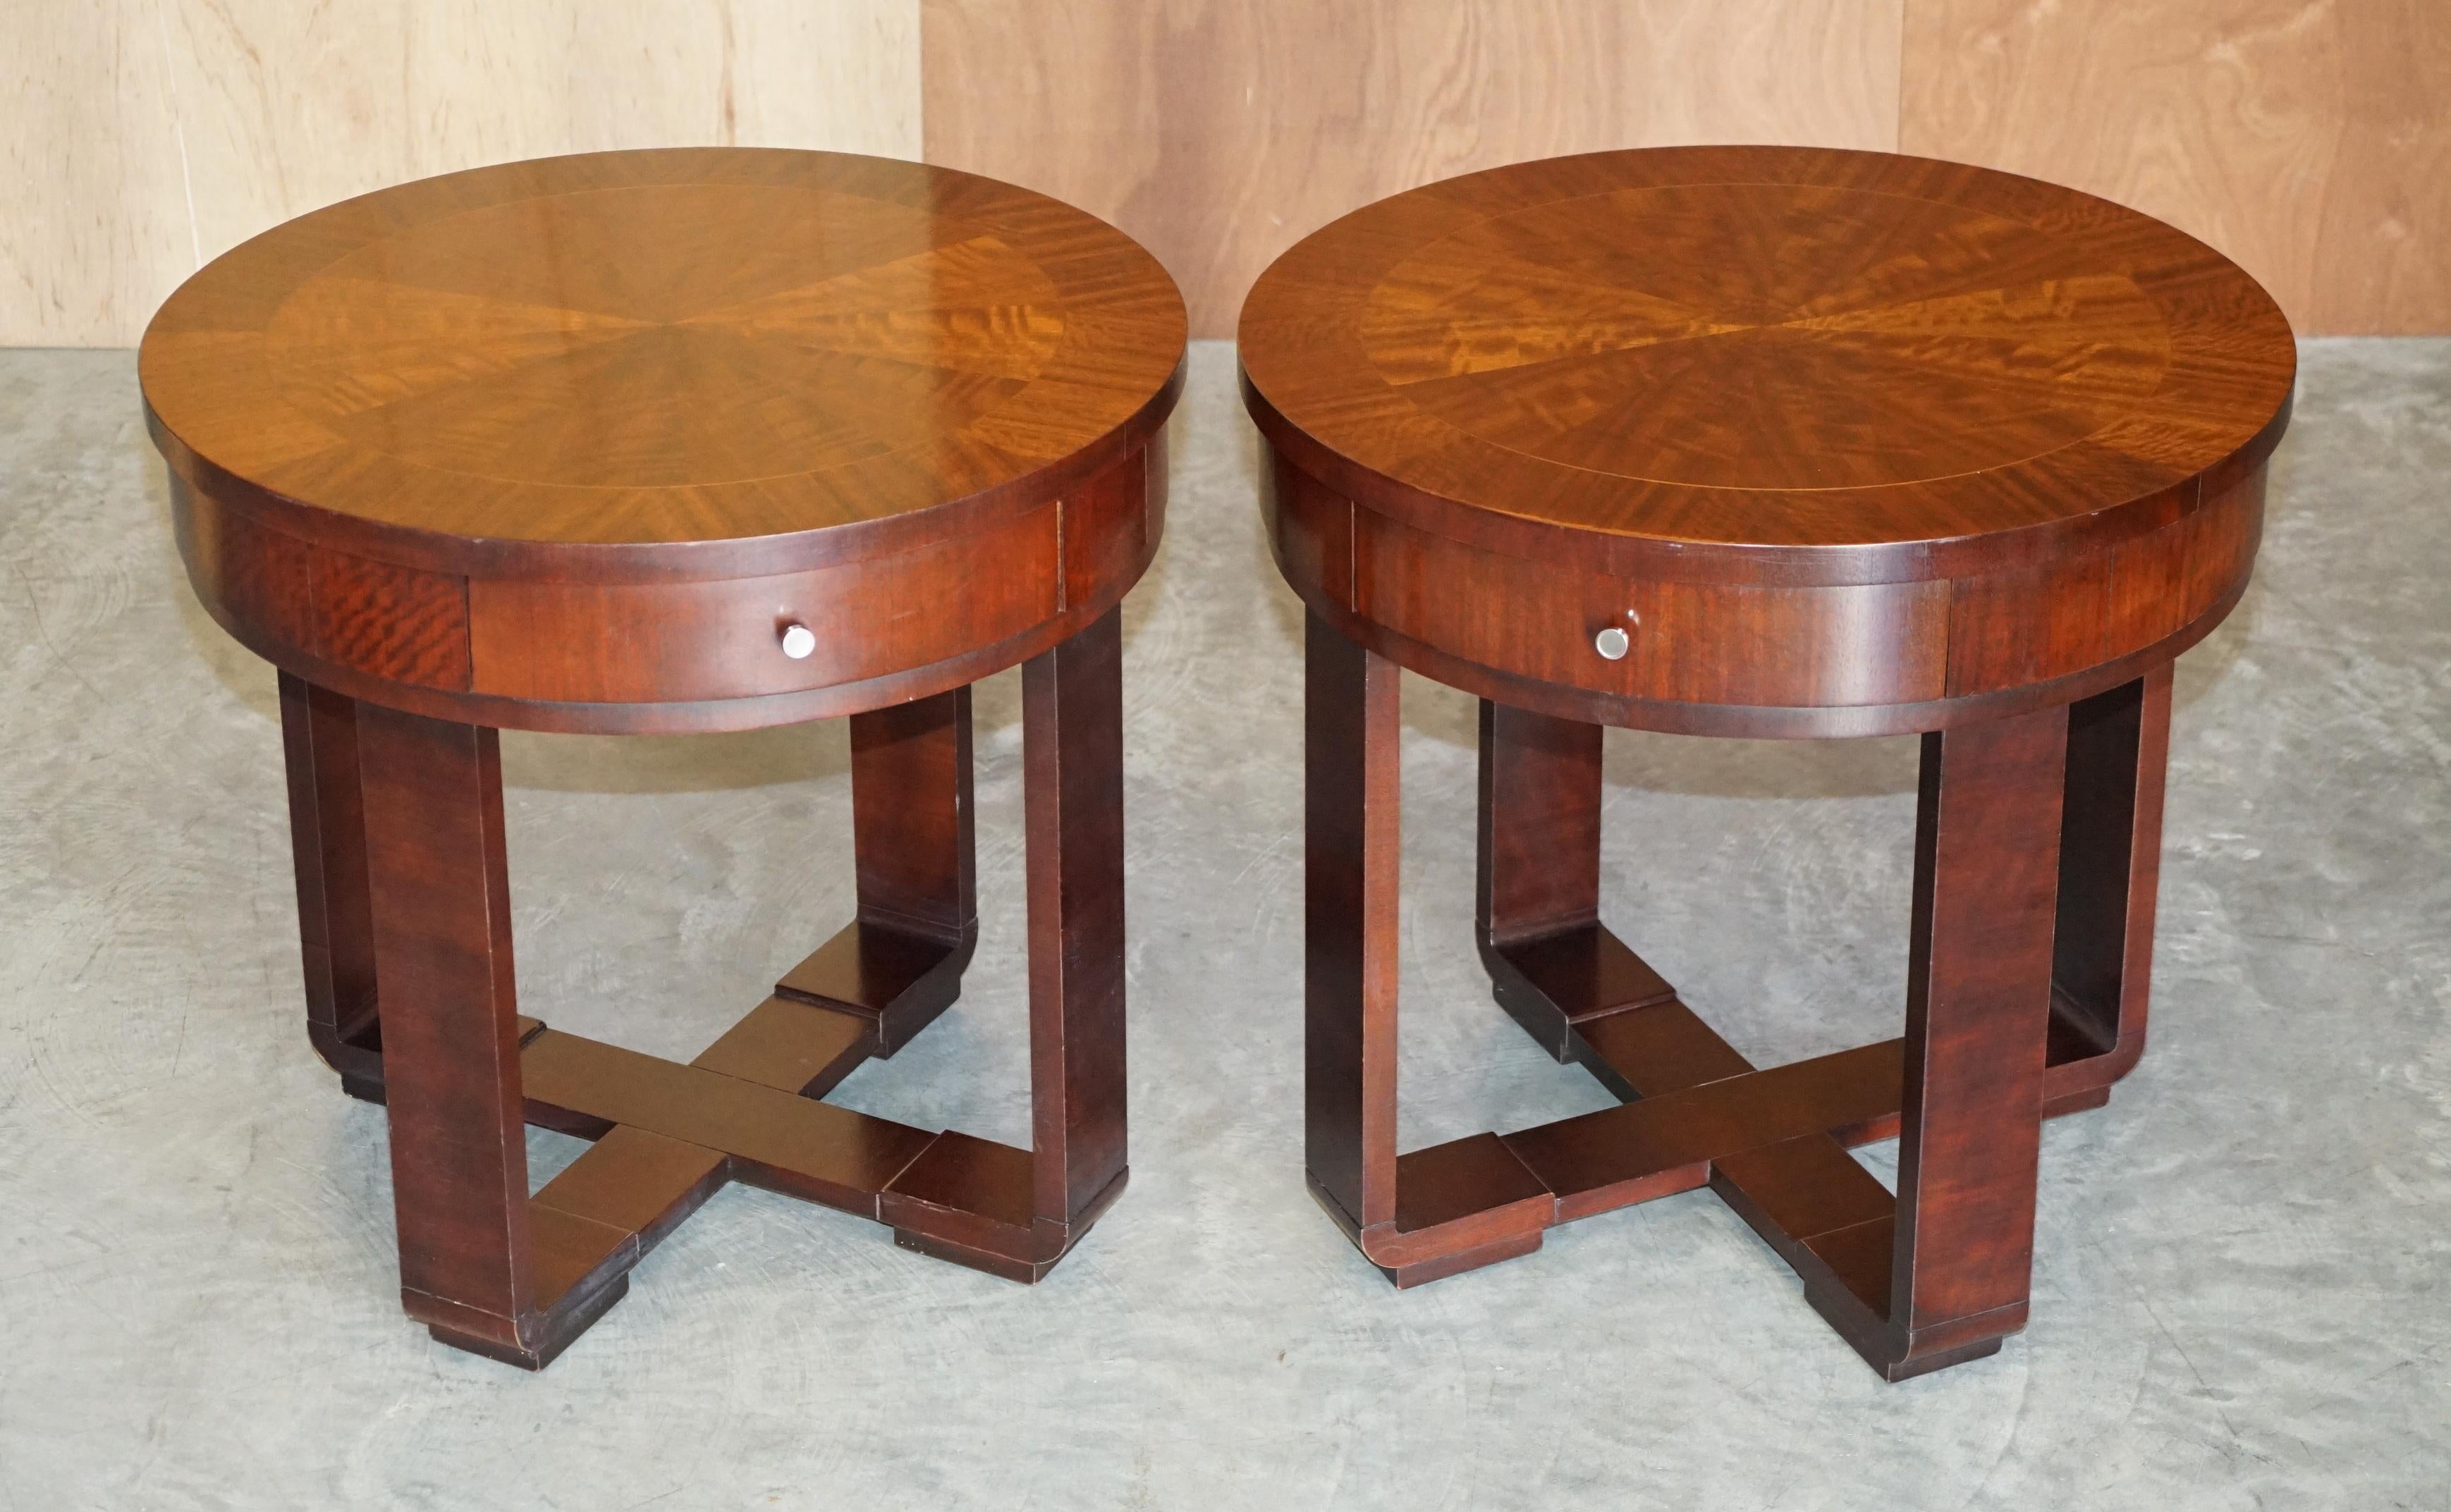 We are delighted to offer for sale this stunning pair of RRP £11,500 very large American mahogany Ralph Lauren side or occasional tables

A good looking and decorative pair, the timber patina is to die for, it is simply glorious, they glow in the